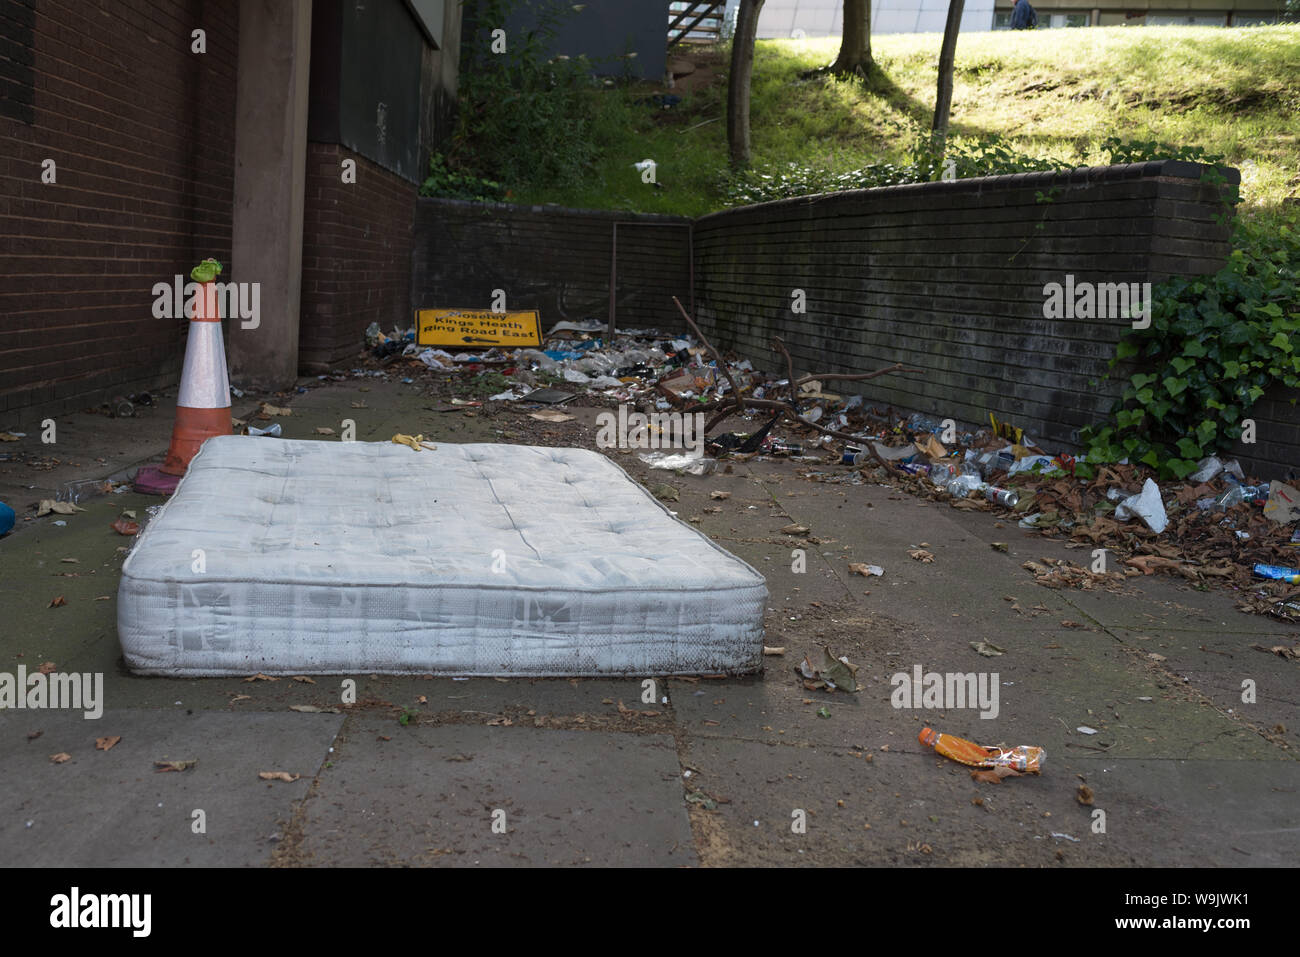 fly tipping on streets rubbish dumped anywhere Stock Photo